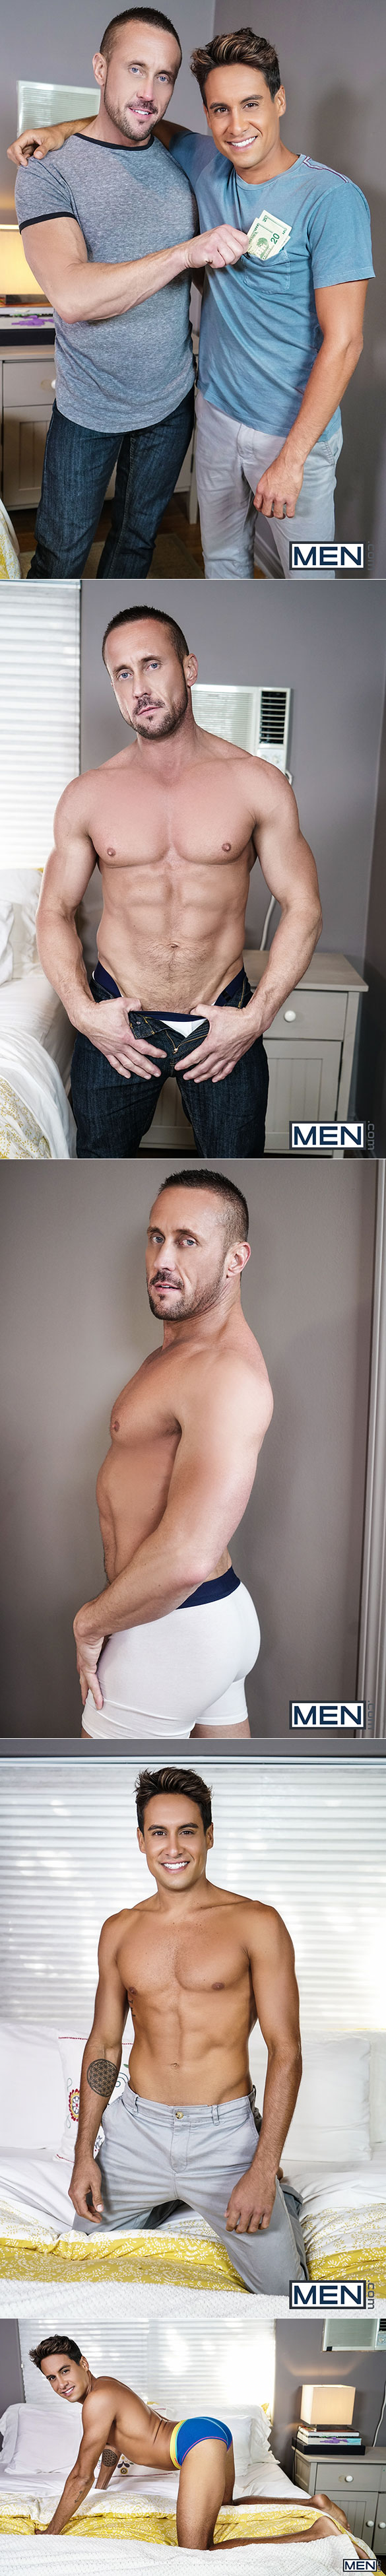 Men.com: Titus takes Myles Landon's thick cock in "Hide the Hooker"